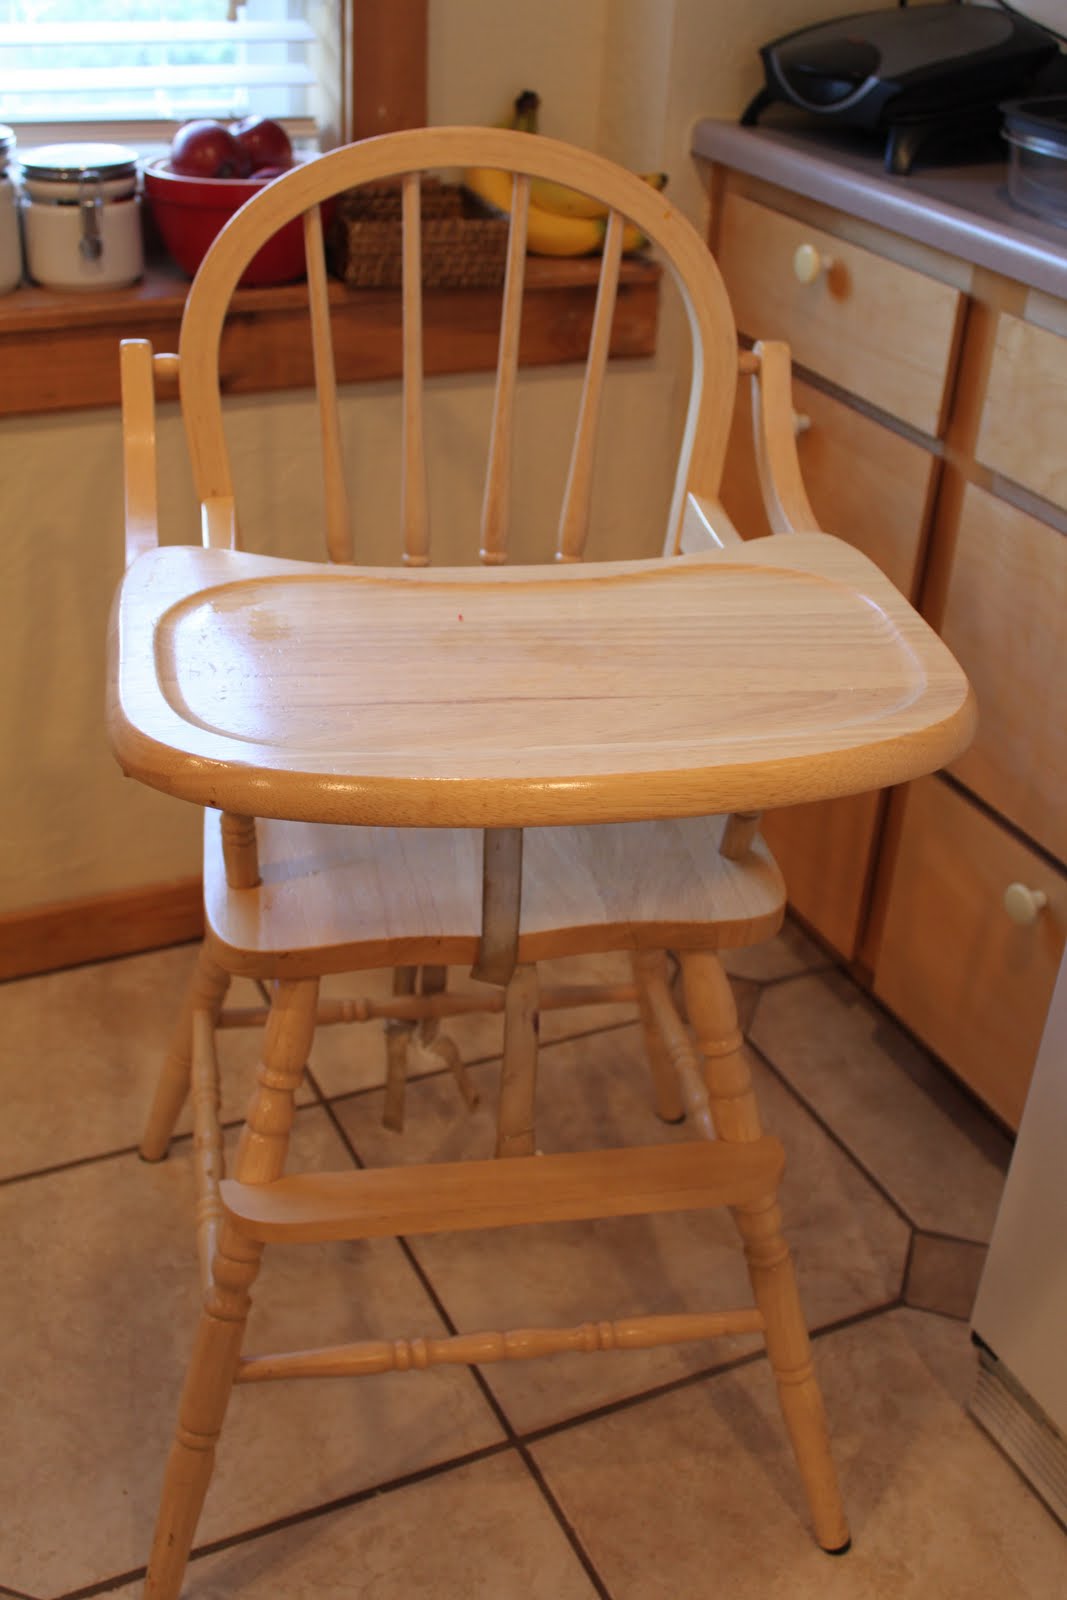 Woodwork Build A Wooden High Chair PDF Plans